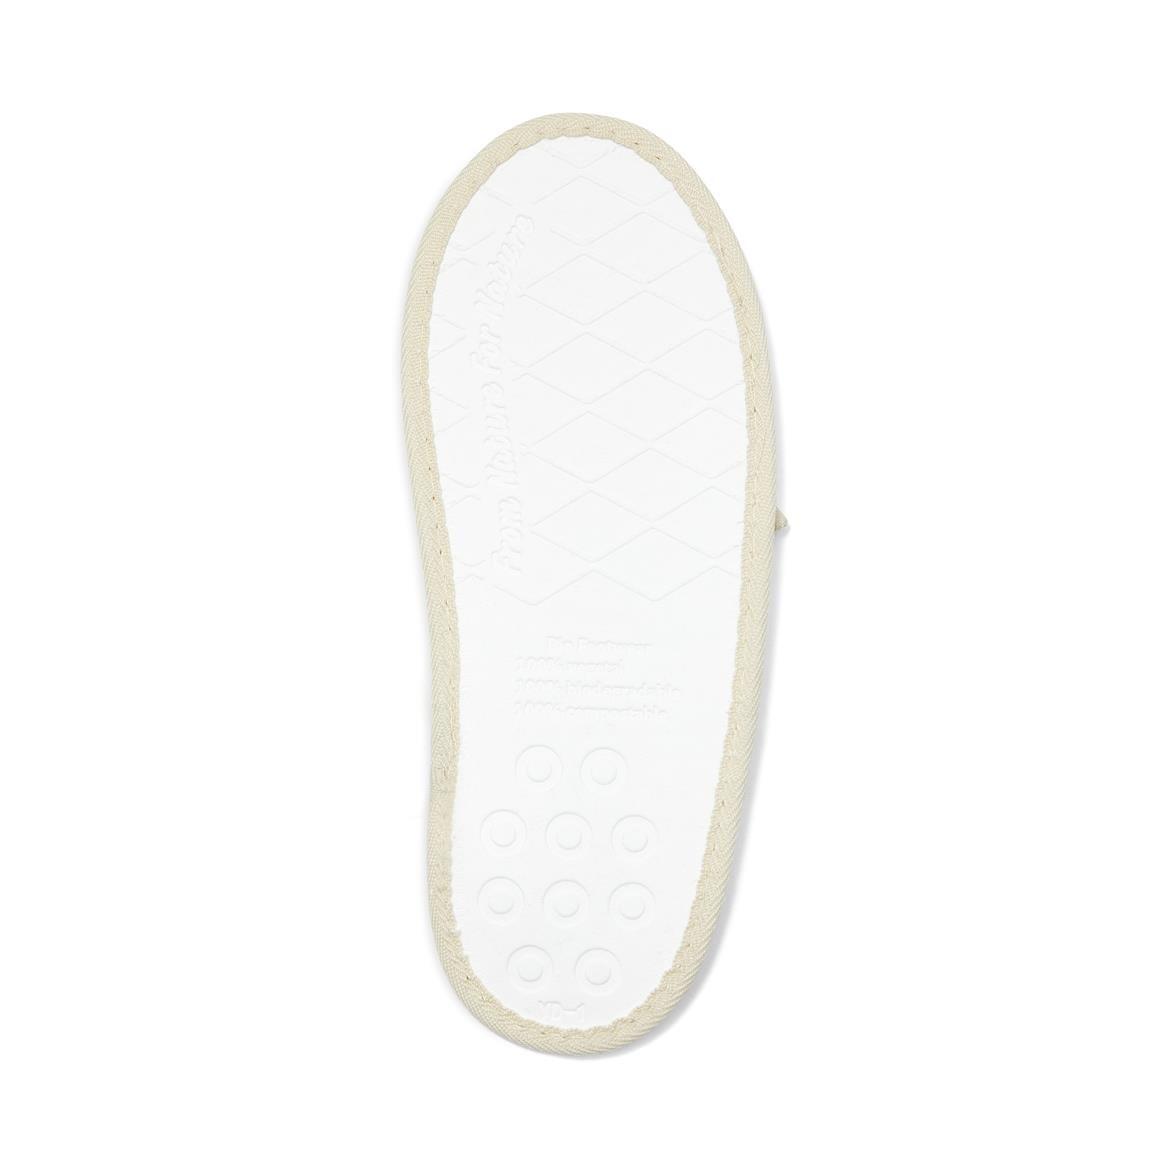 biodegradable hotel spa slippers